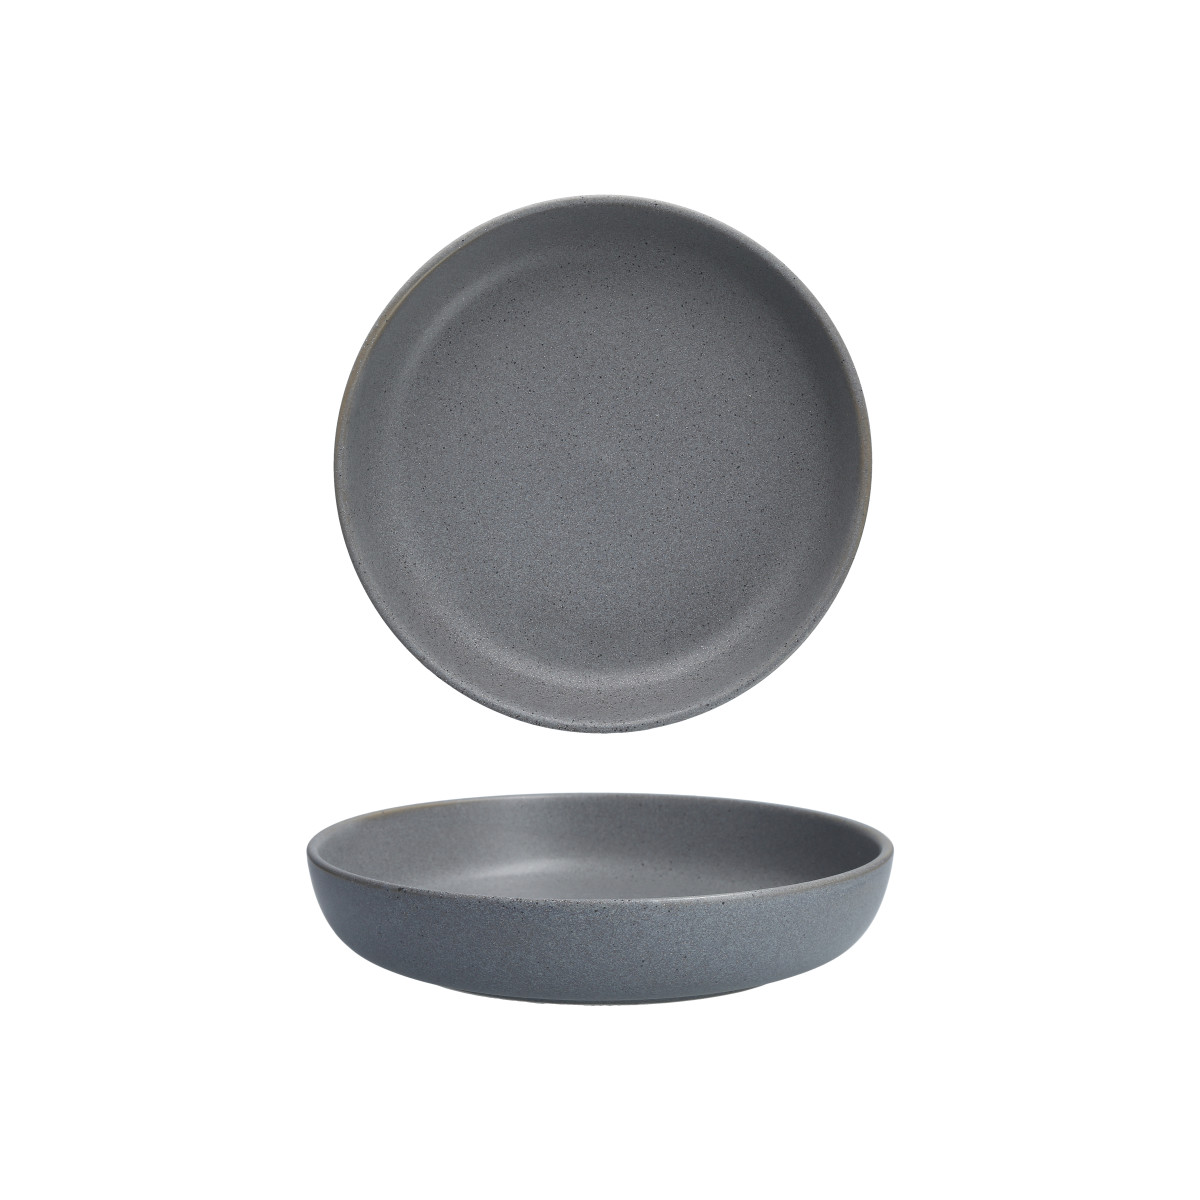 Sound Low Coupe Bowl, Cement, Set of 4